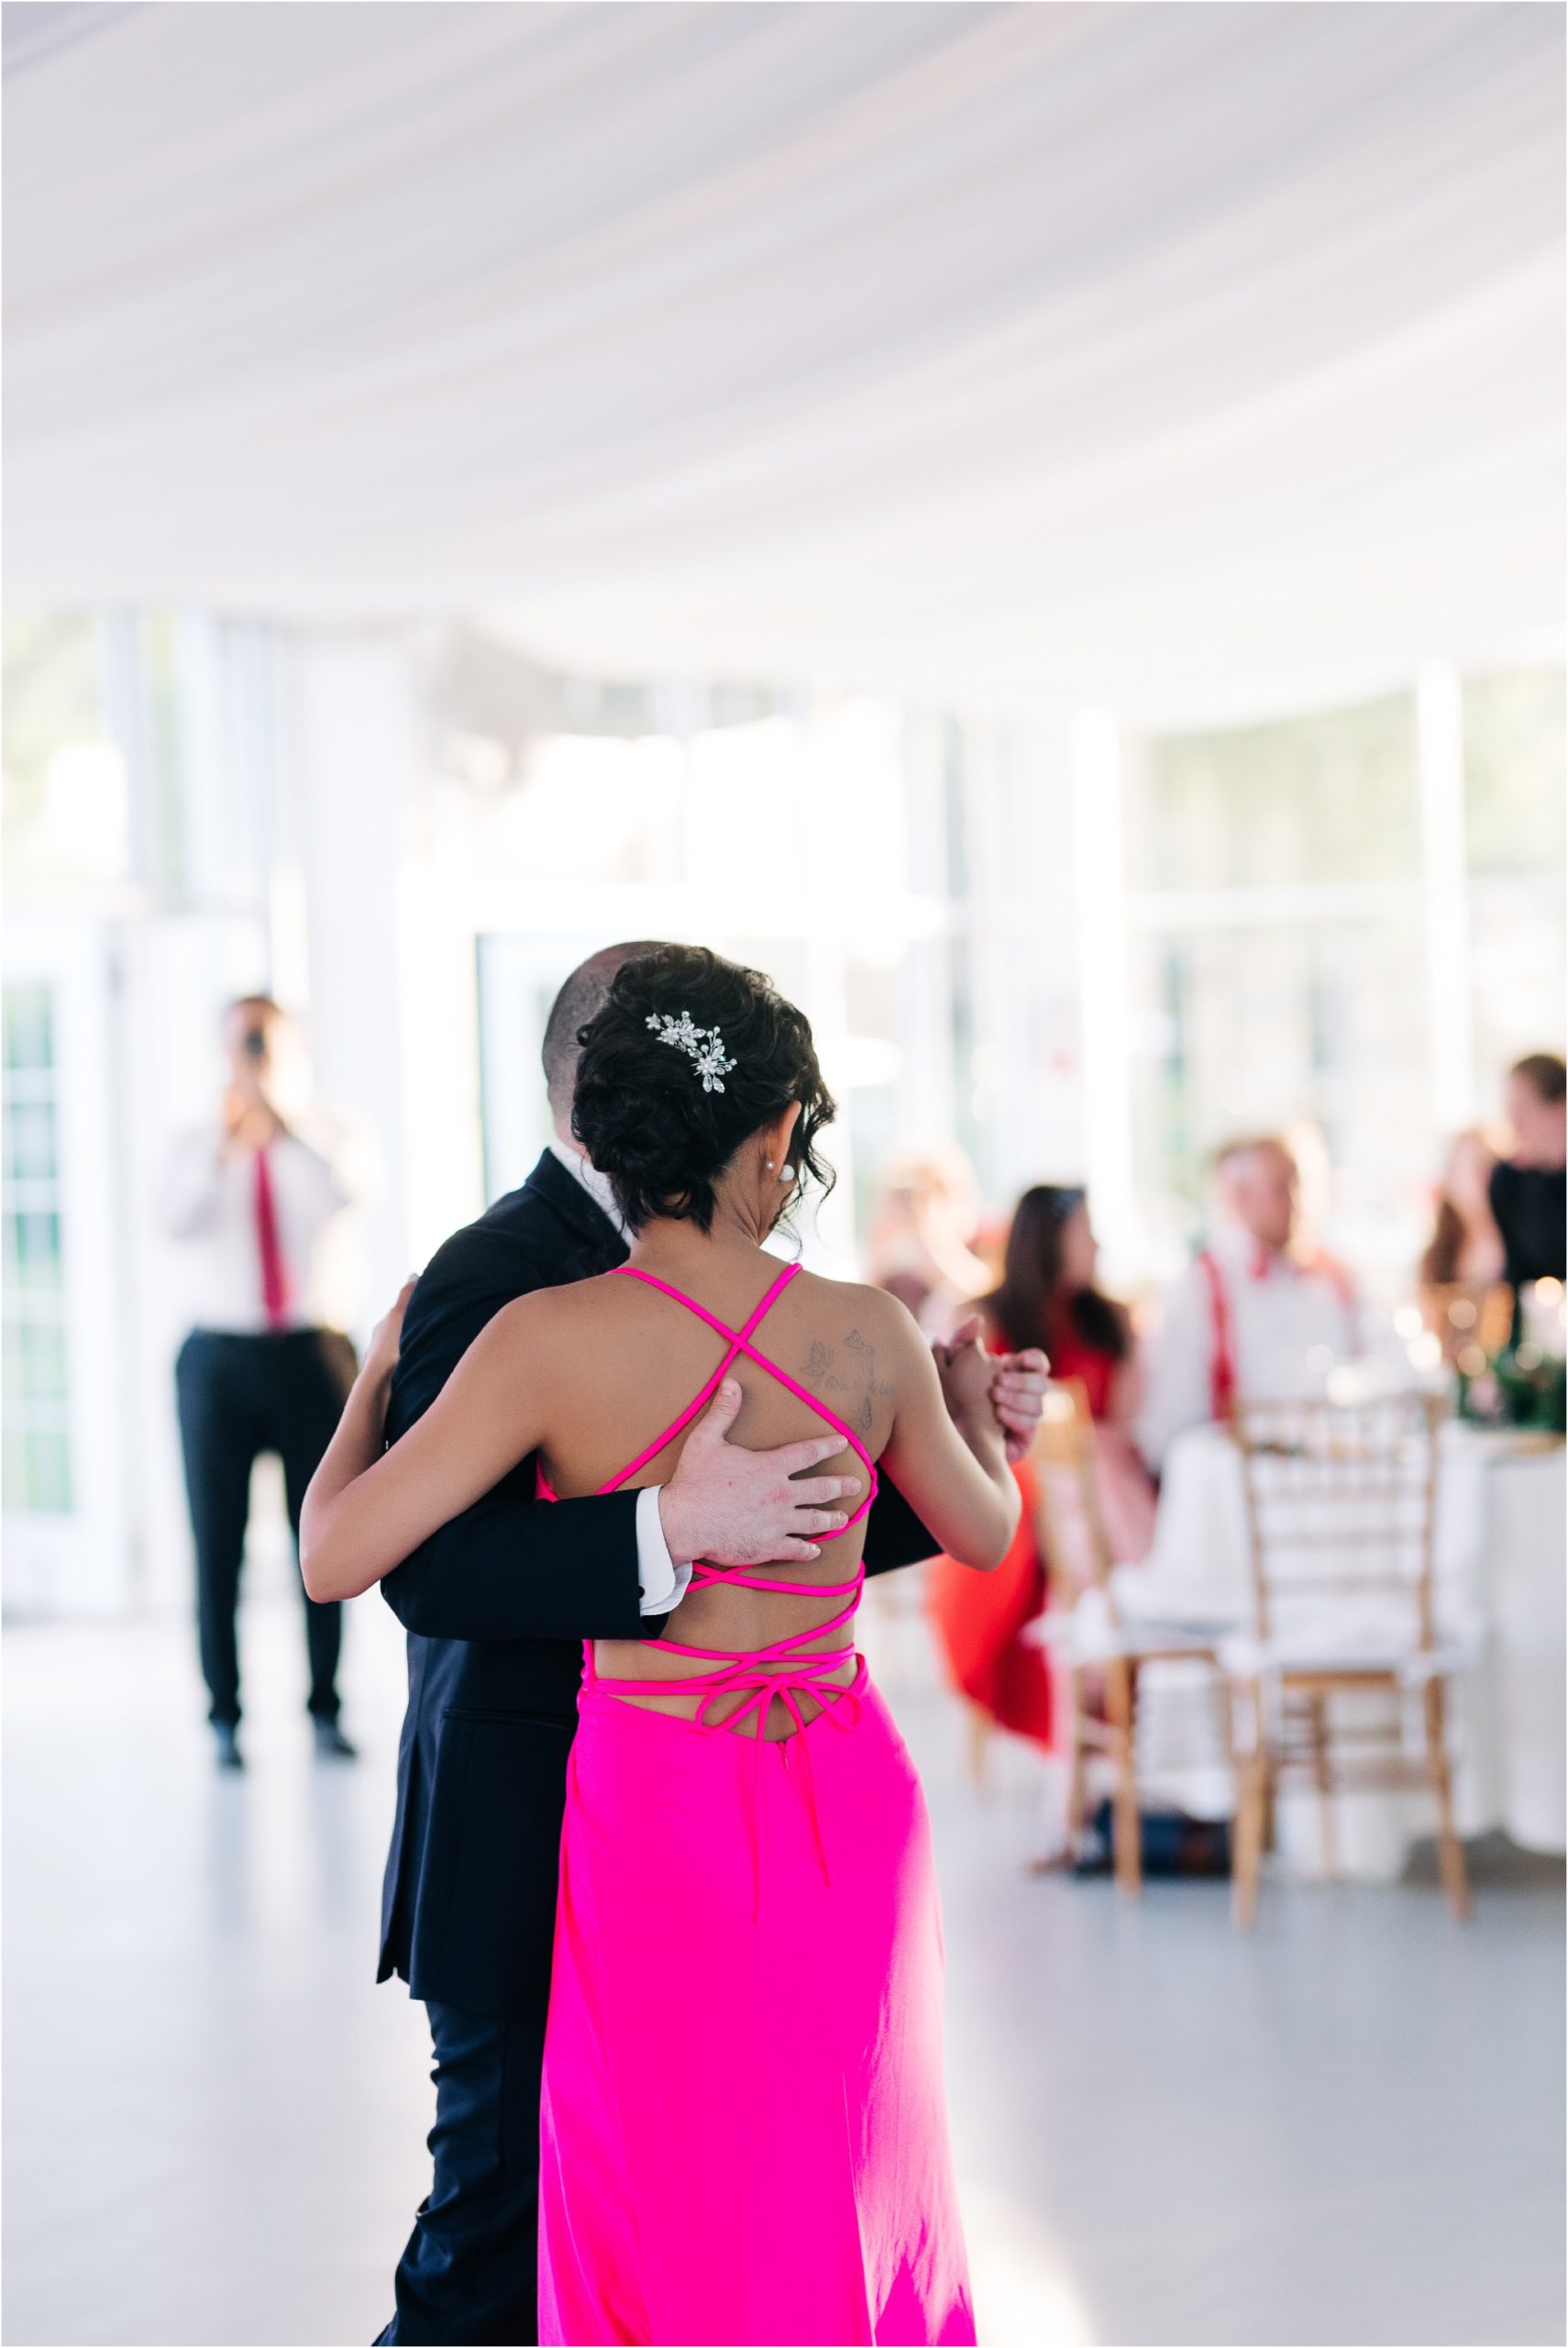 first dance in new wedding gown